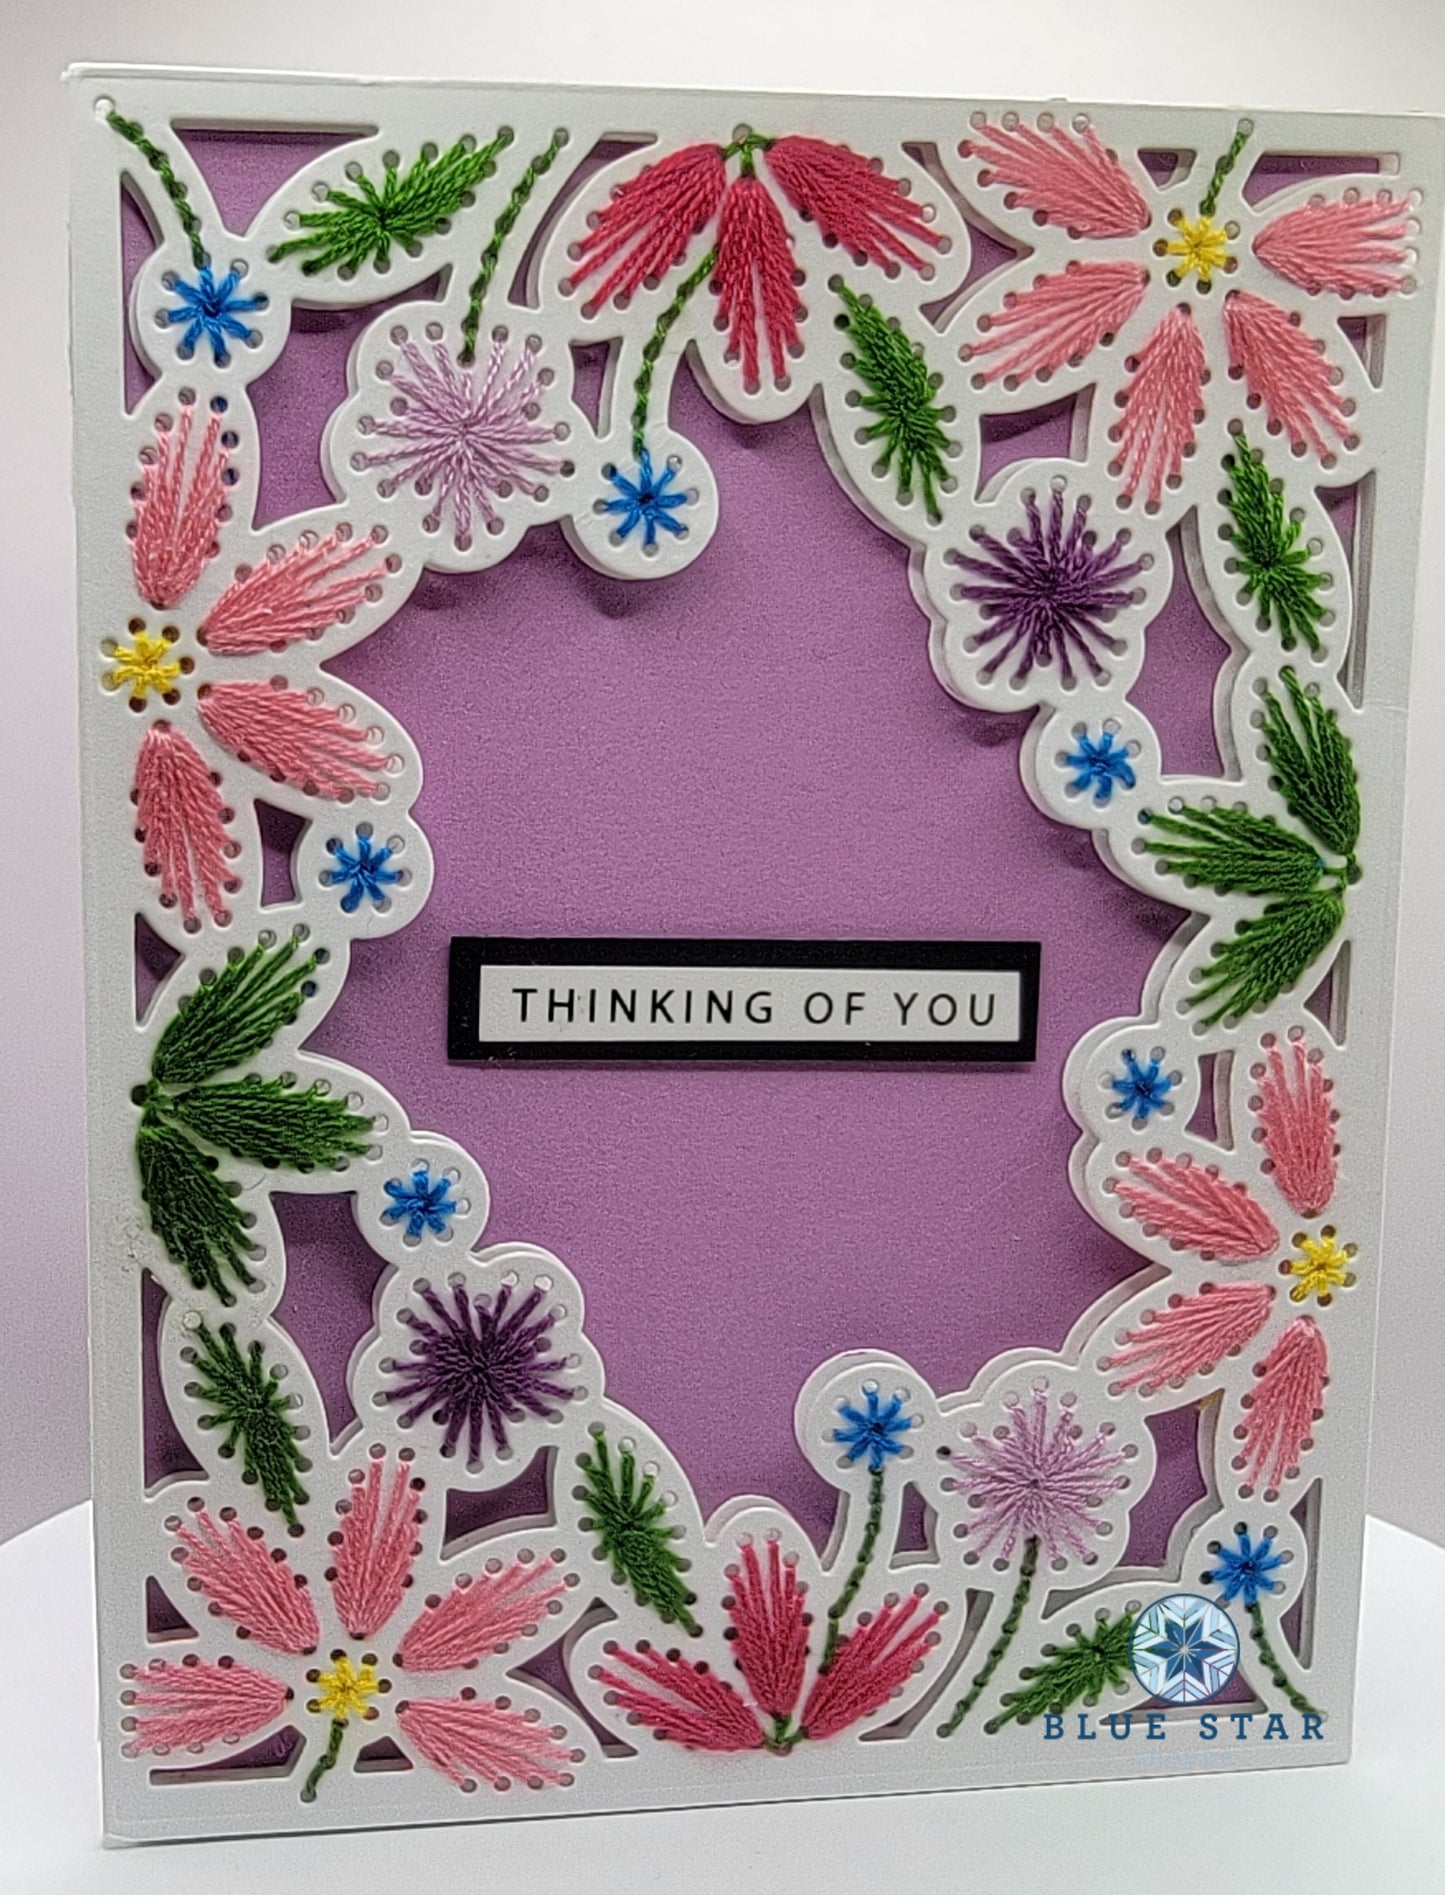 Thinking of You - stitched